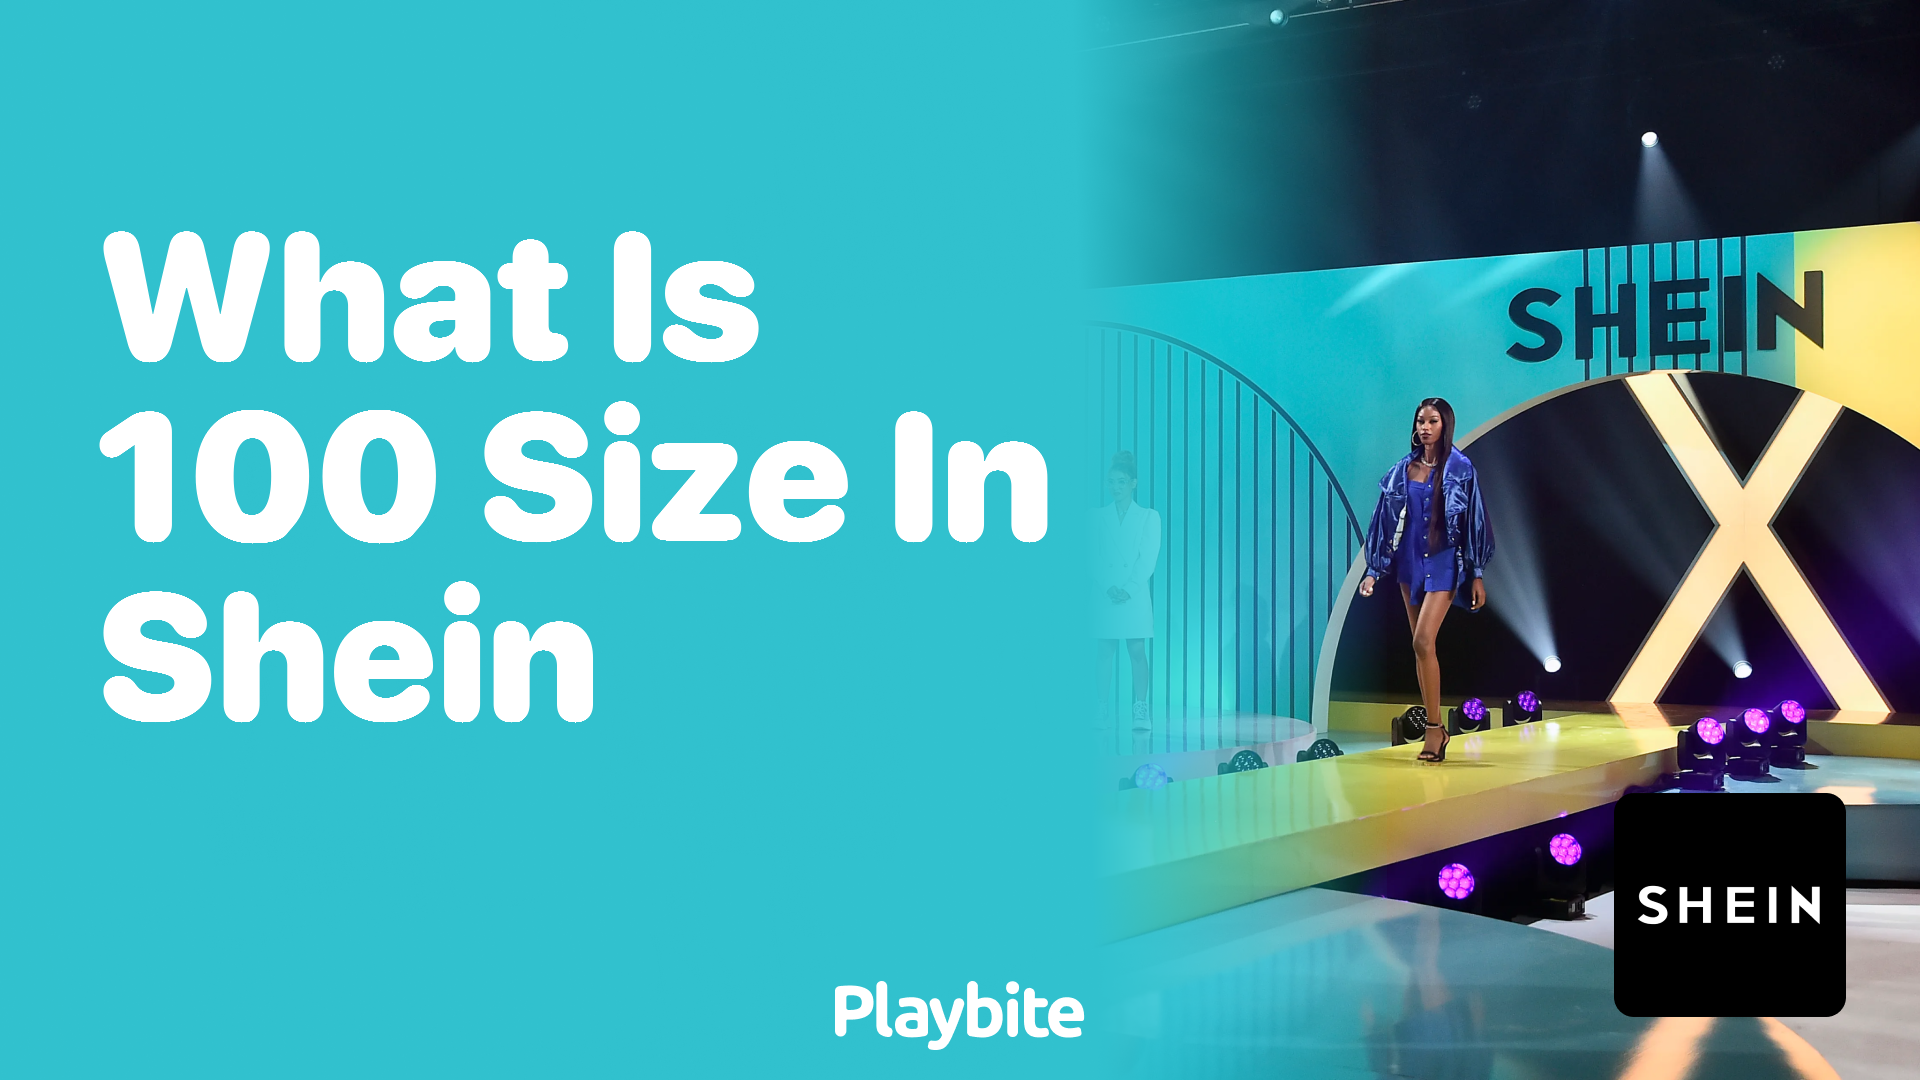 What Does 100 Size Mean on SHEIN? - Playbite